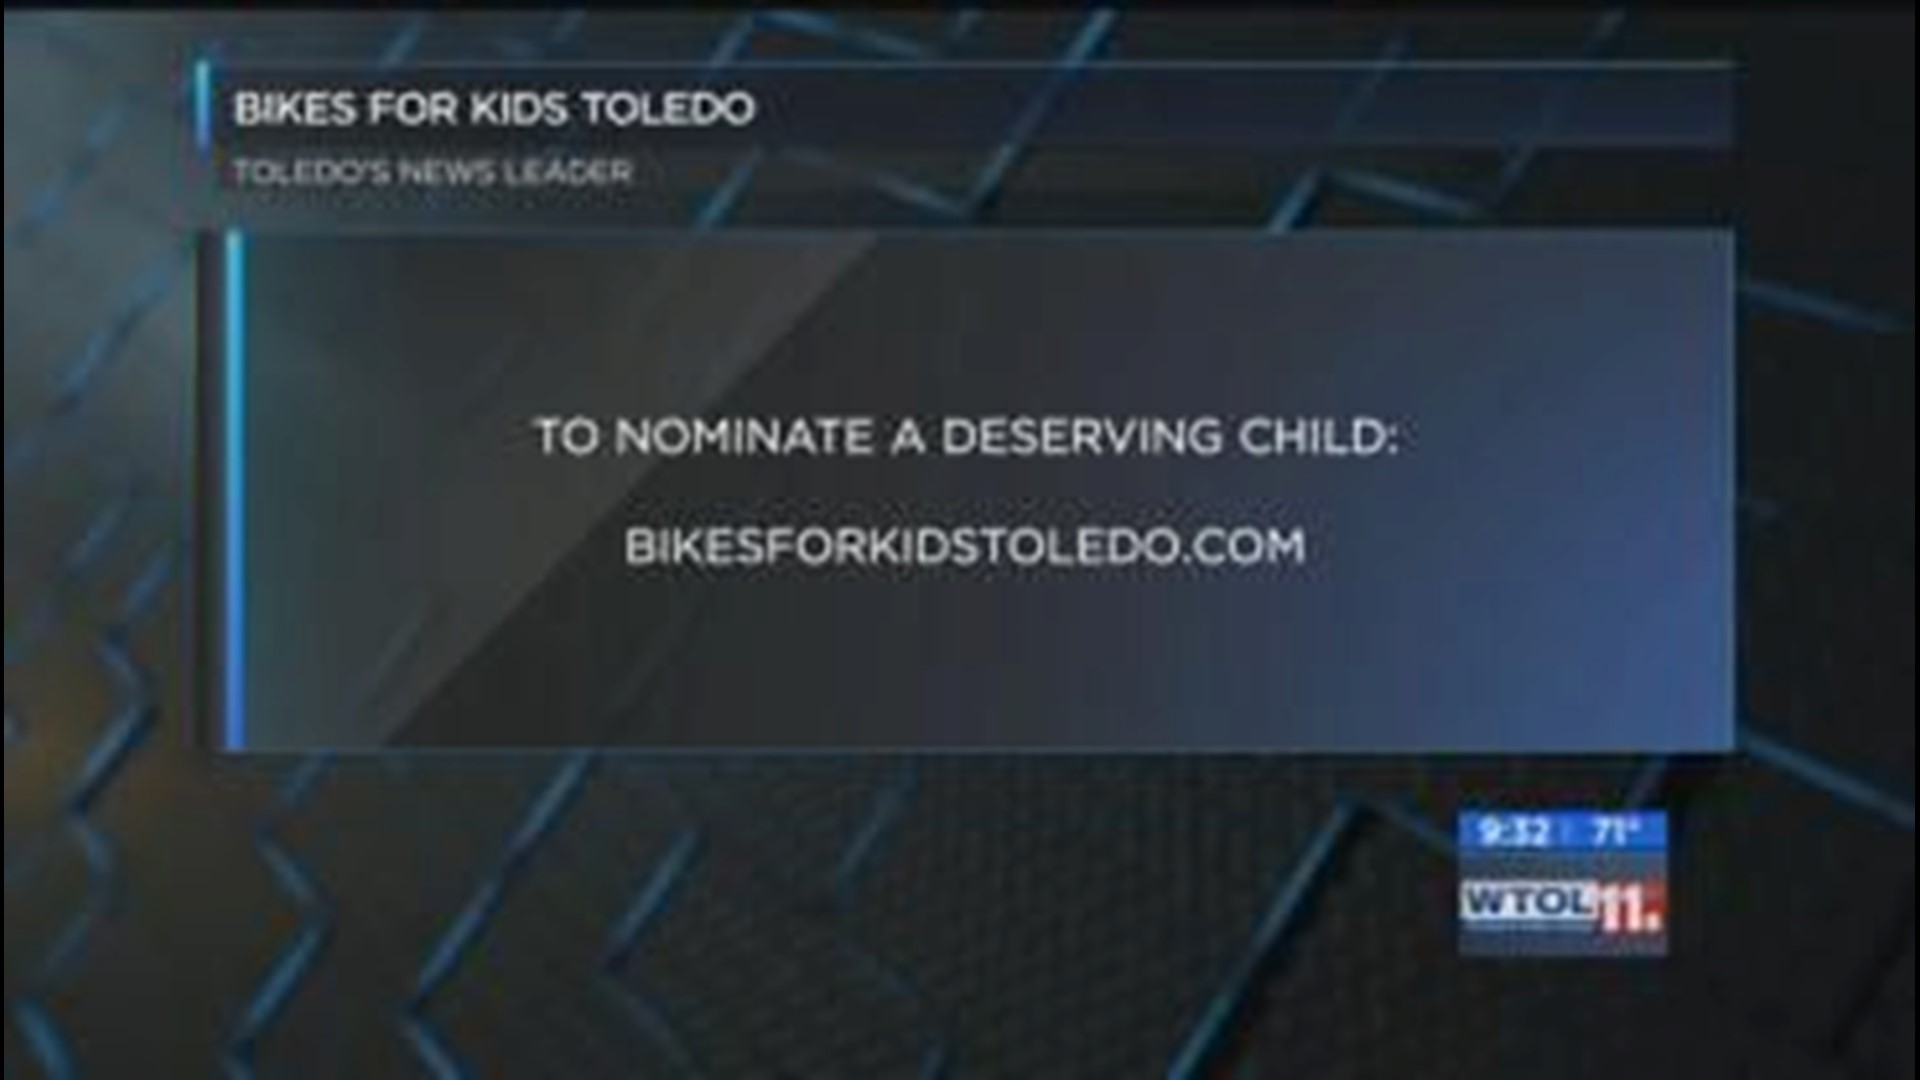 Bikes for Kids' winner saves mother twice from near-fatal health scares